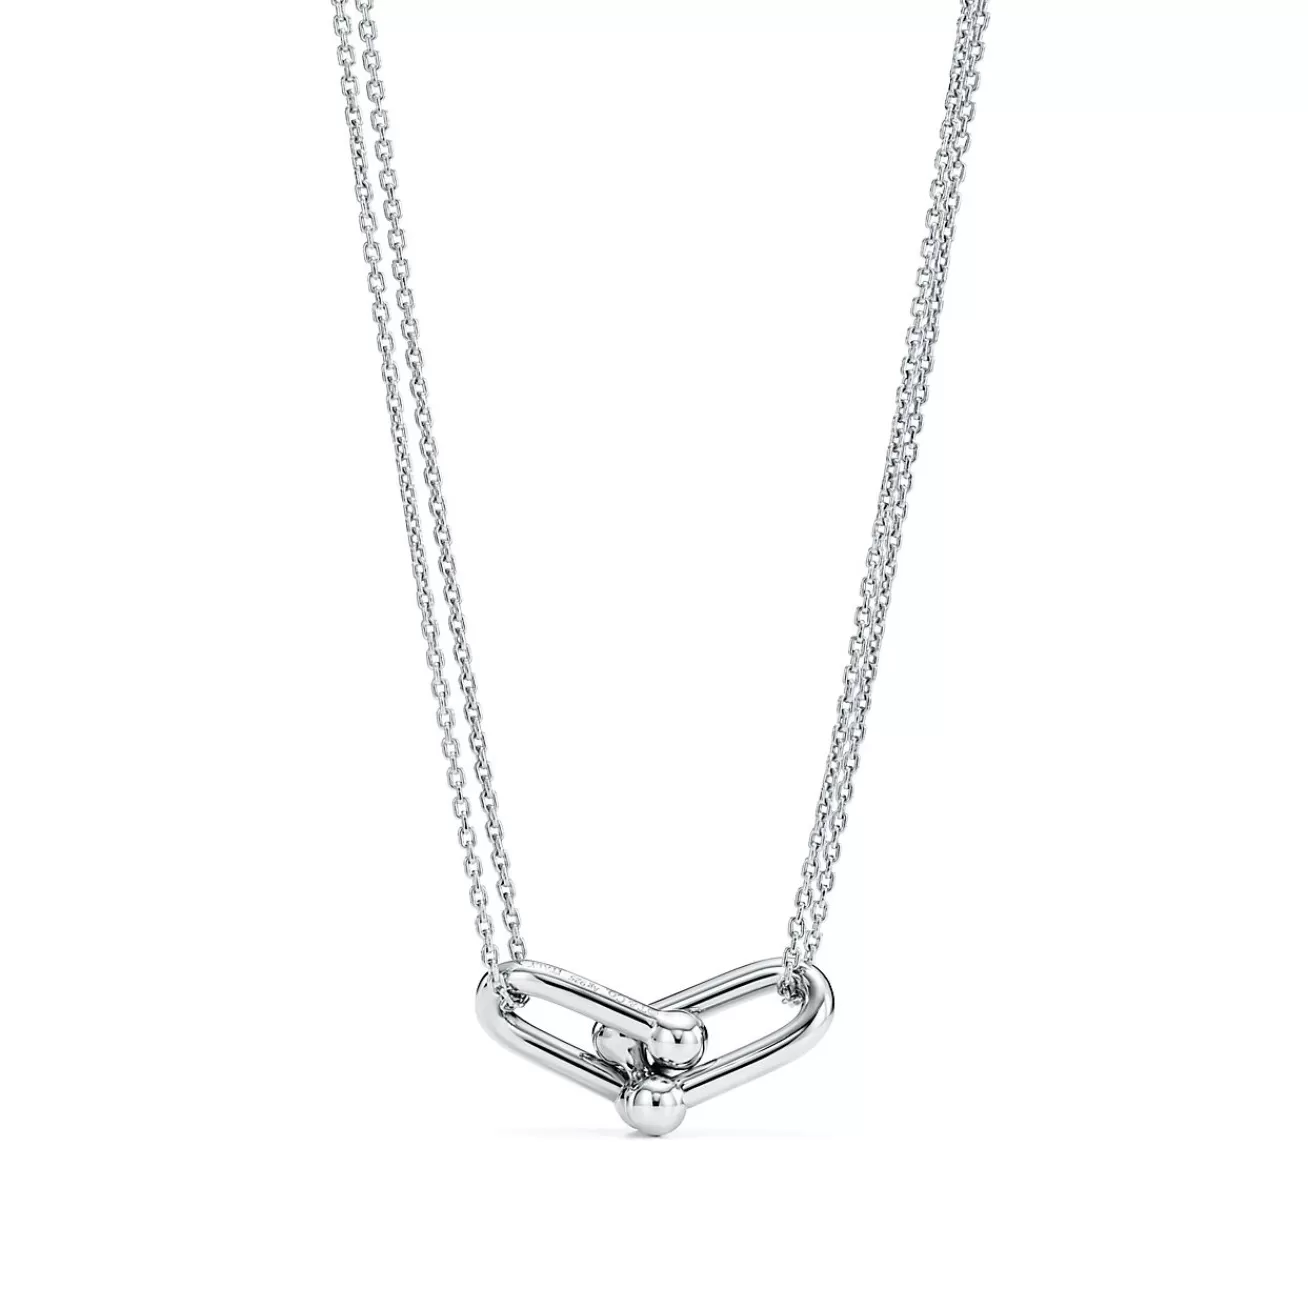 Tiffany & Co. Tiffany HardWear Large Double Link Pendant in Sterling Silver | ^ Necklaces & Pendants | Gifts for Her